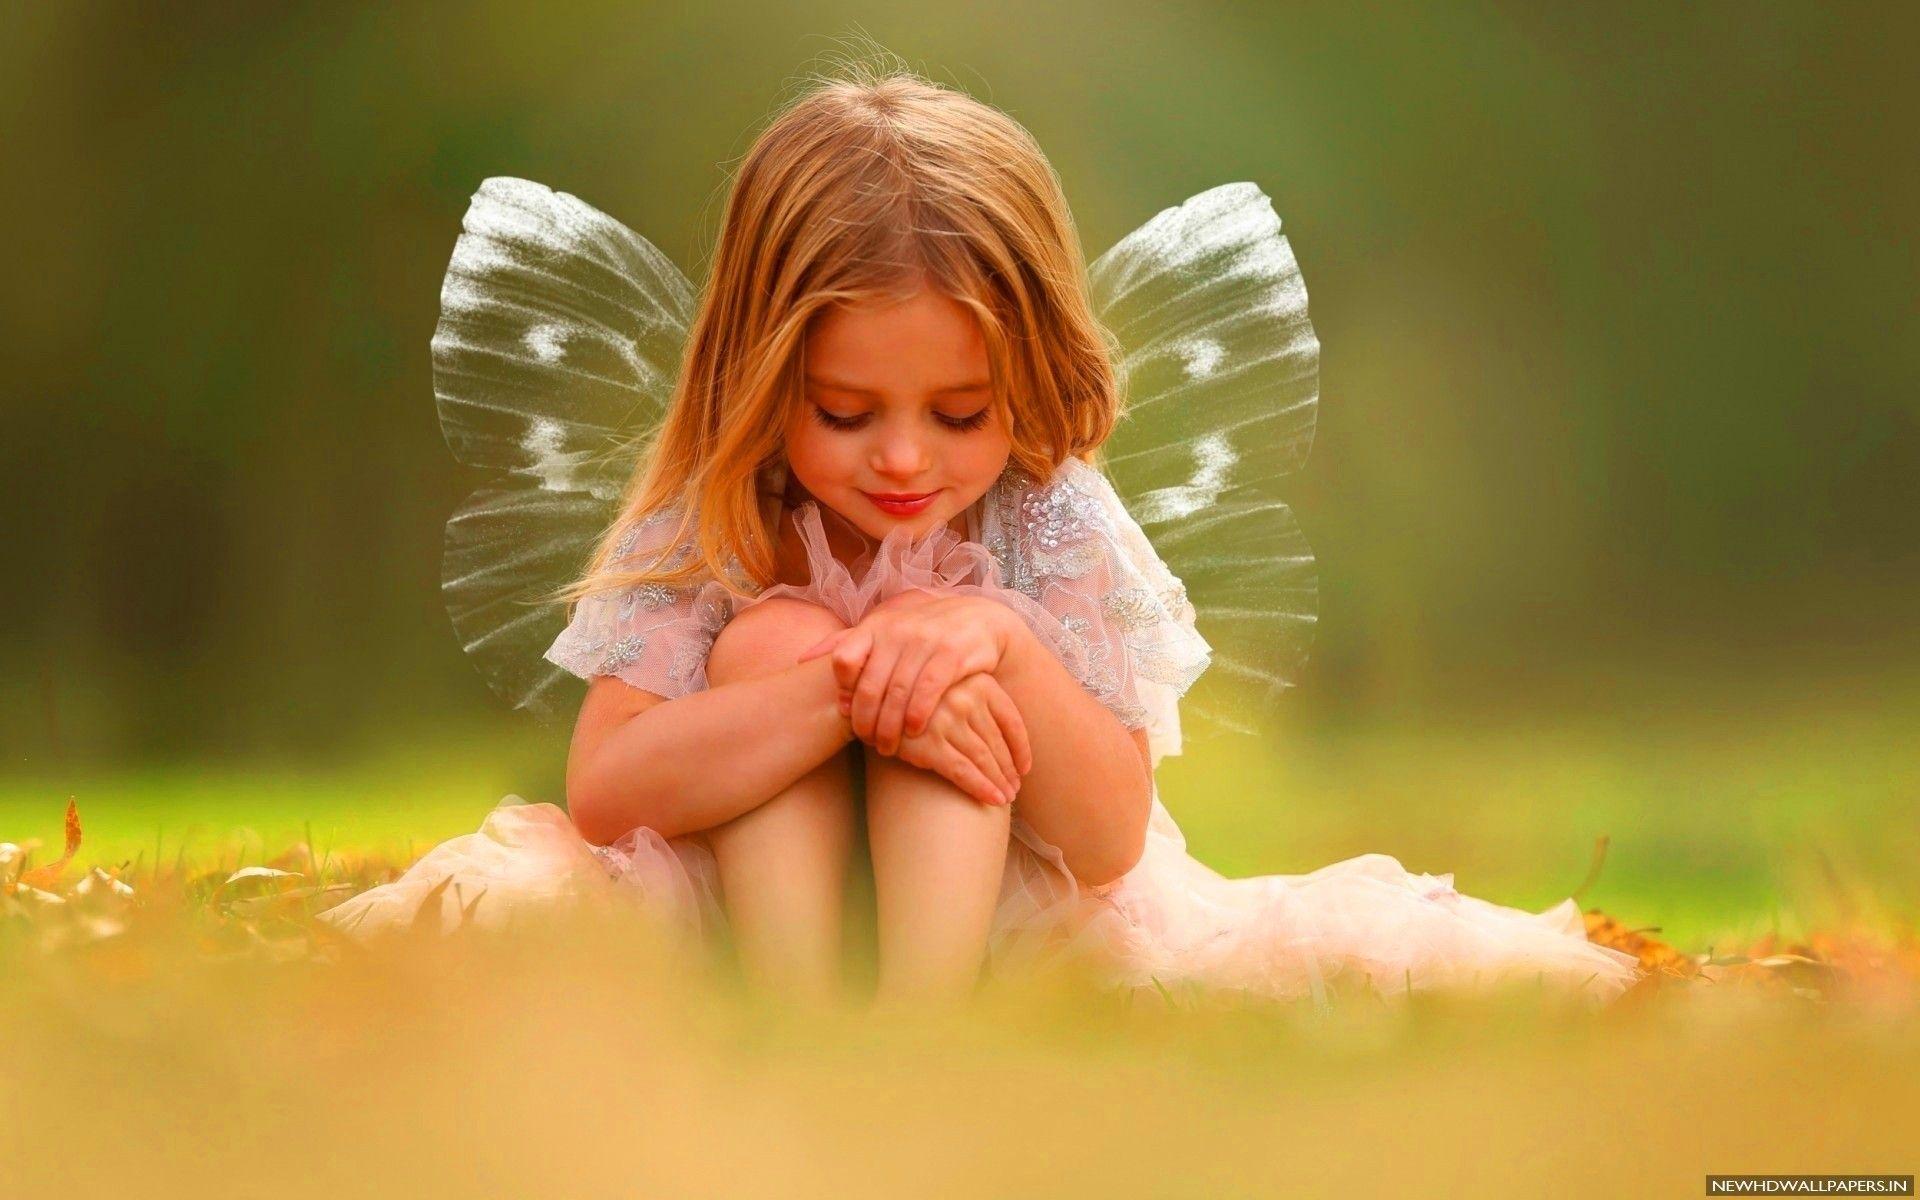 Cute Little Girl HD Wallpaper For PC, Laptop and Mobile